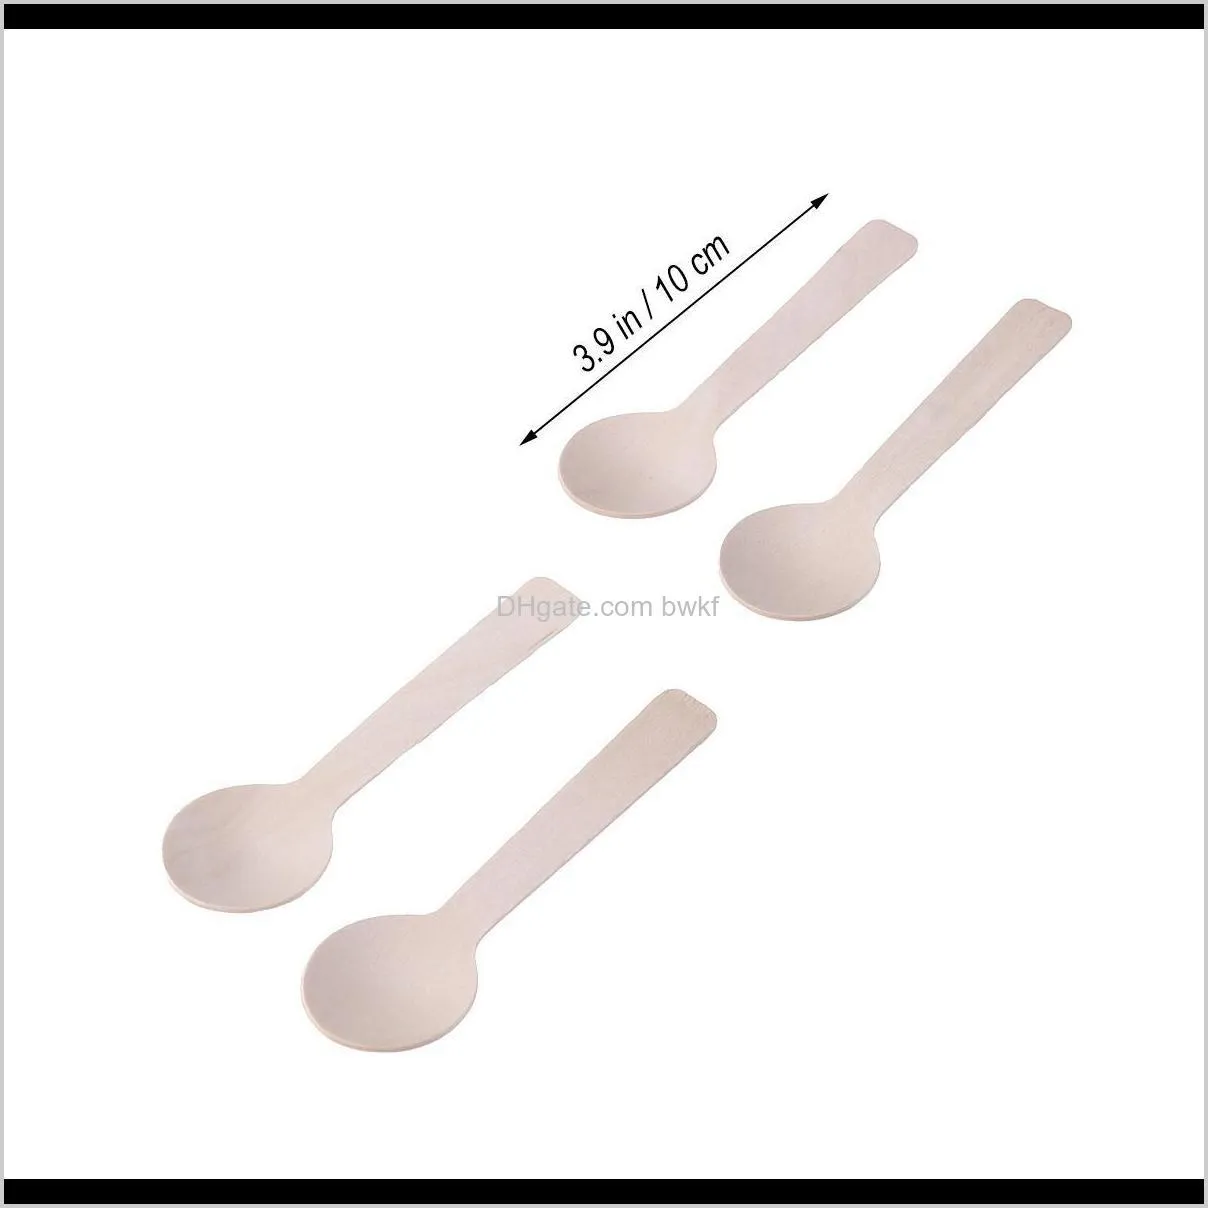 fashin 200pcs disposable wood tableware dinnerware premium safe spoons cutlery tableware for outdoor picnic hiking party